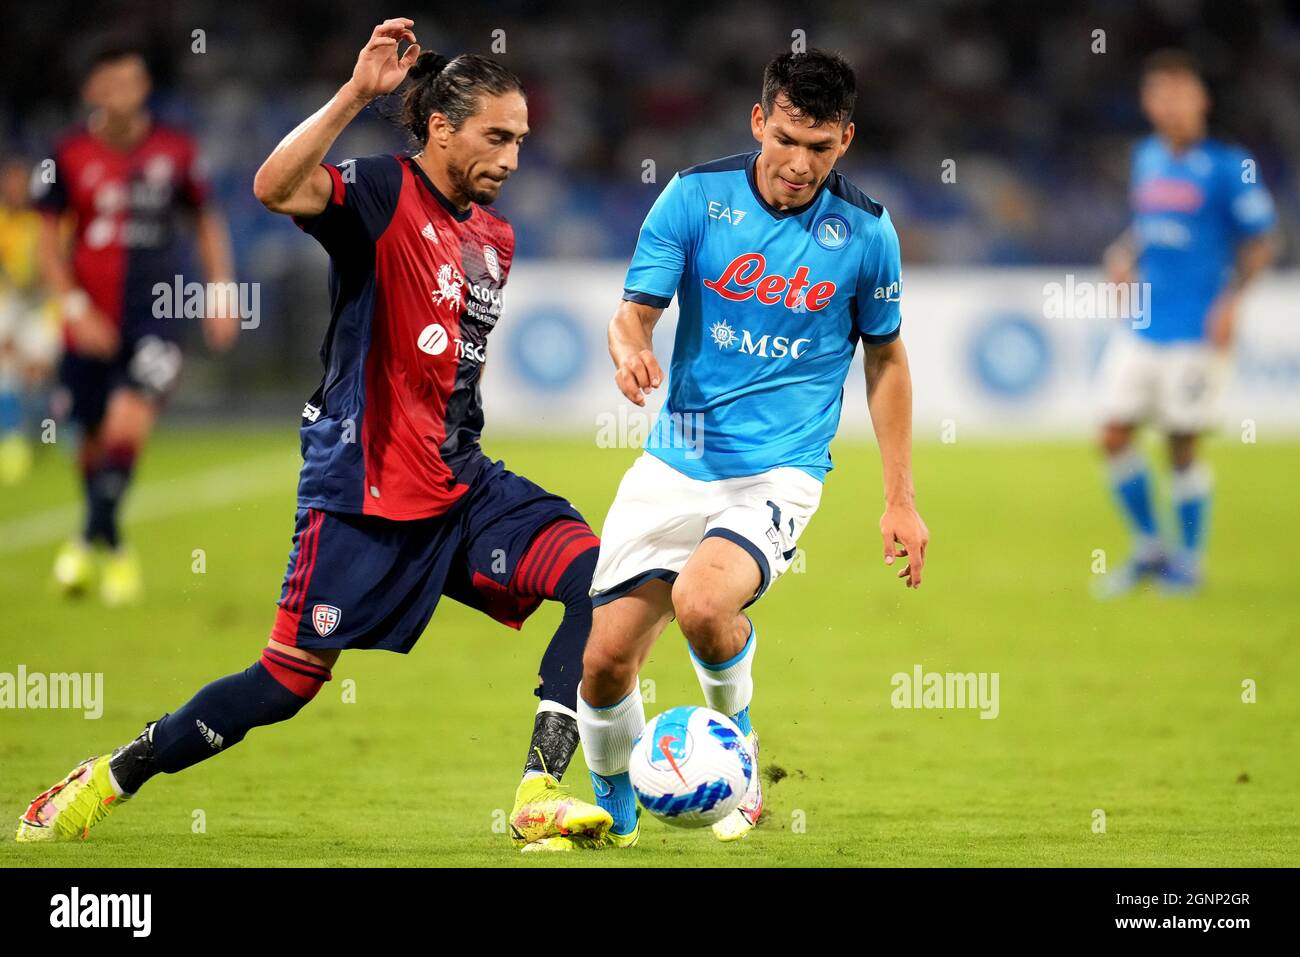 NAPLES, ITALY - SEPTEMBER 26: Hirving Lozano of SSC Napoli competes for the ball with Martin Caceres of Cagliari Calcio ,during the Serie A match between SSC Napoli and Cagliari Calcio at Stadio Diego Armando Maradona on September 26, 2021 in Naples, Italy. (Photo by MB Media) Stock Photo